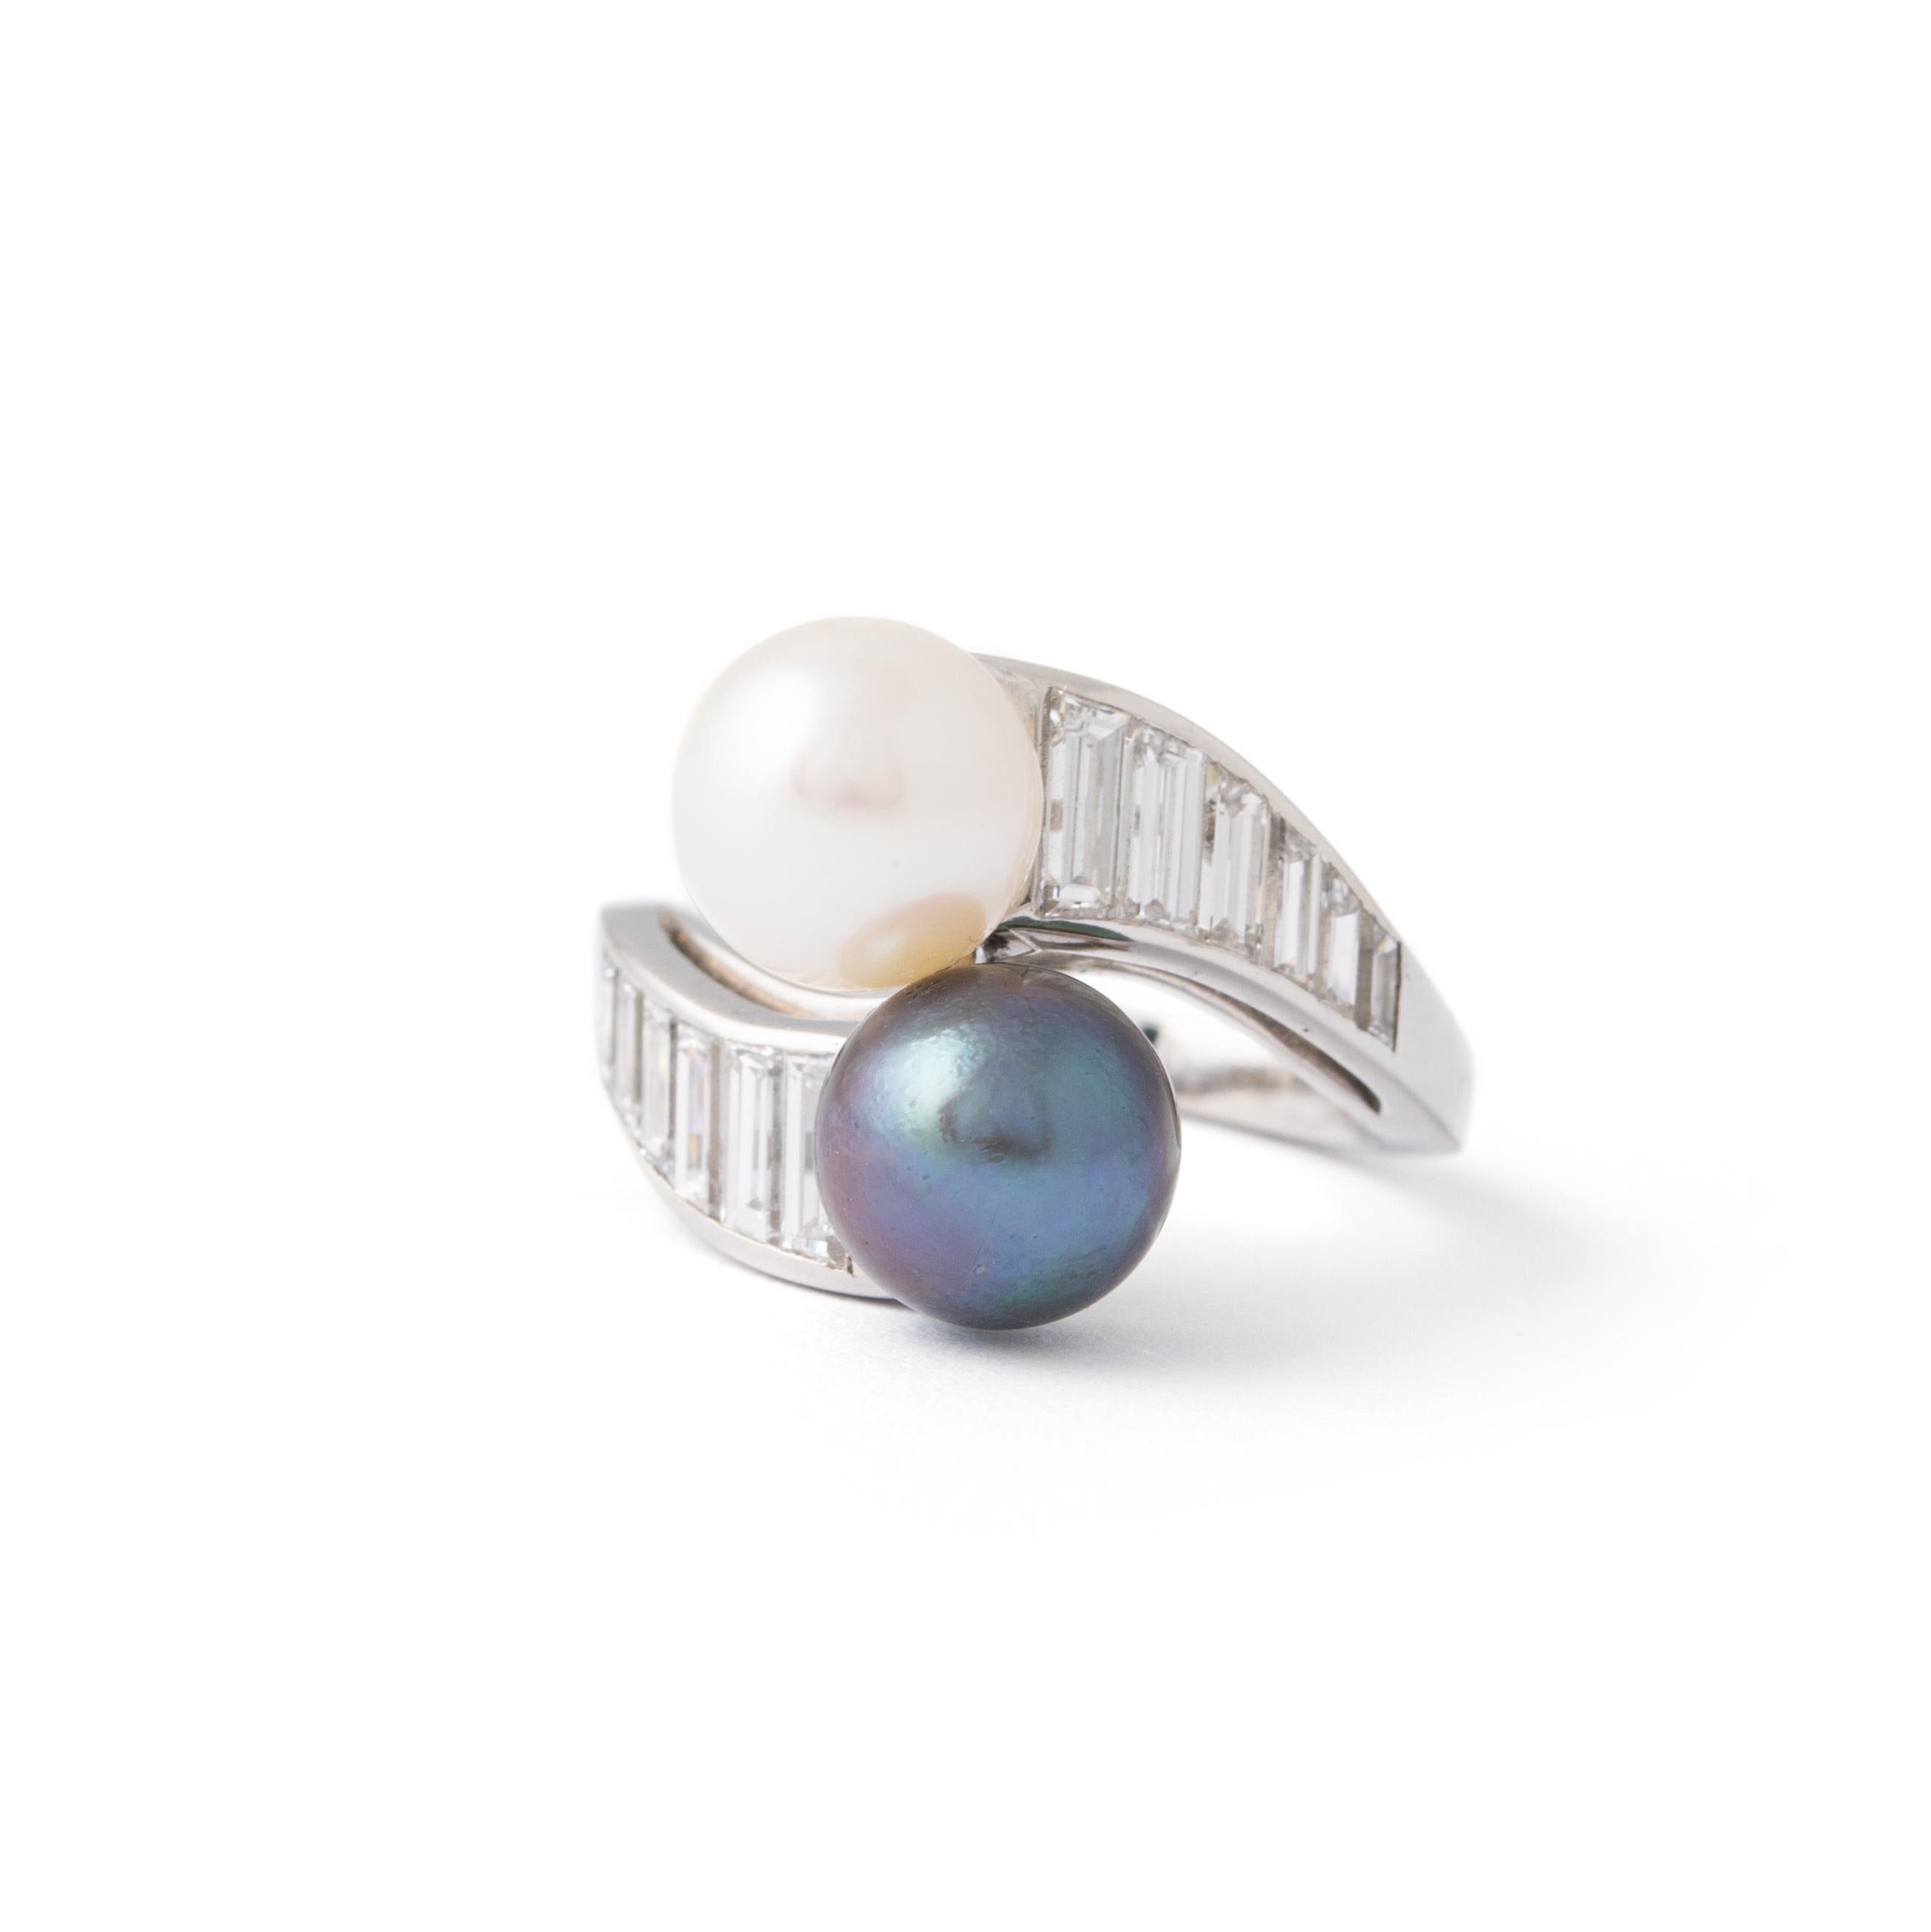 Introducing an exquisite marvel, our Cultured Pearls White and Grey Platinum Ring is a fusion of timeless elegance and contemporary design.

The centerpiece of this ring is a pair of lustrous cultured pearls, each measuring 8.2-8.4 mm in diameter.